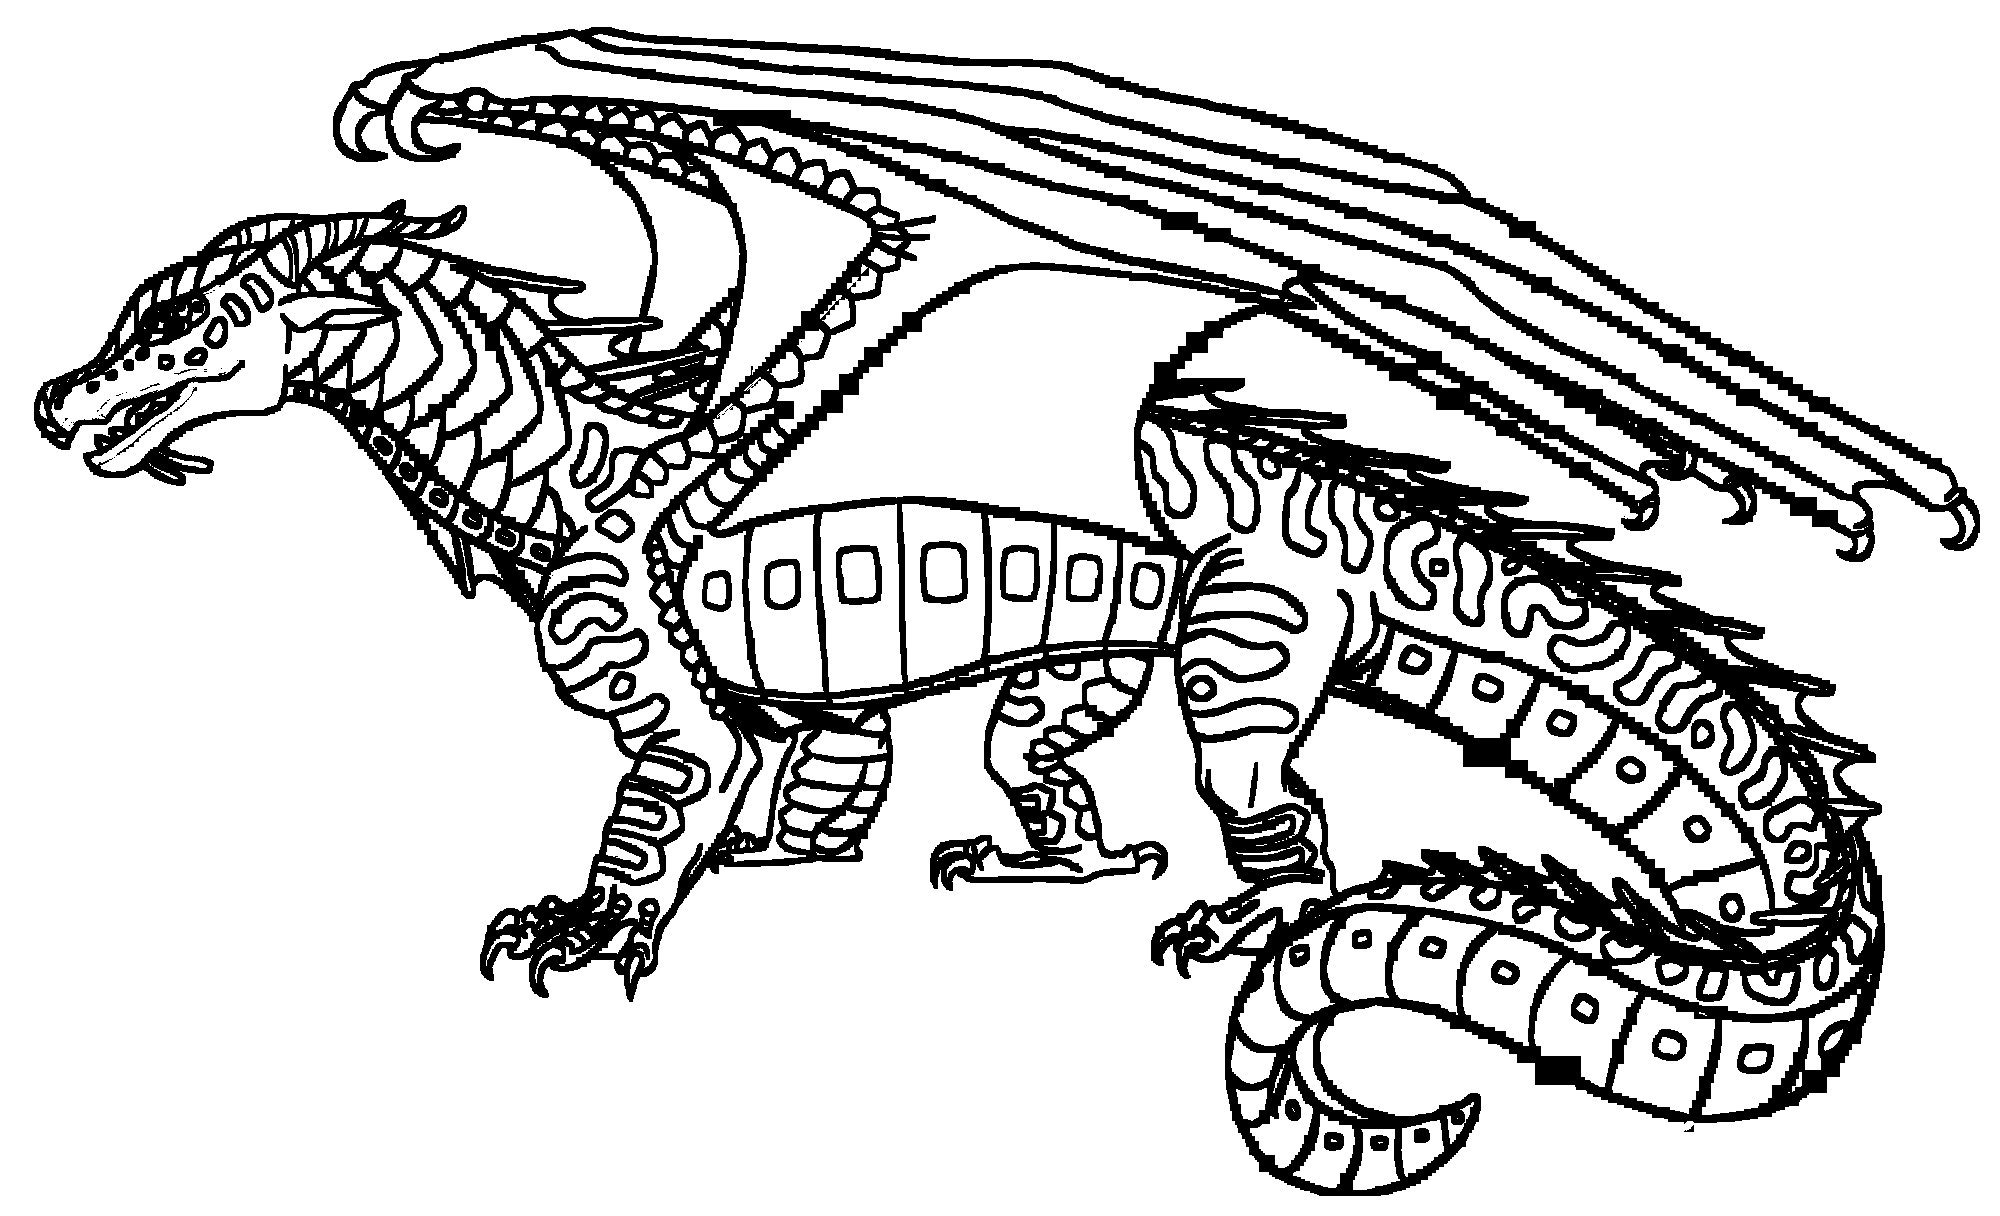 Coloring Pages : Coloring Book Realistic Dragon Of Dragons